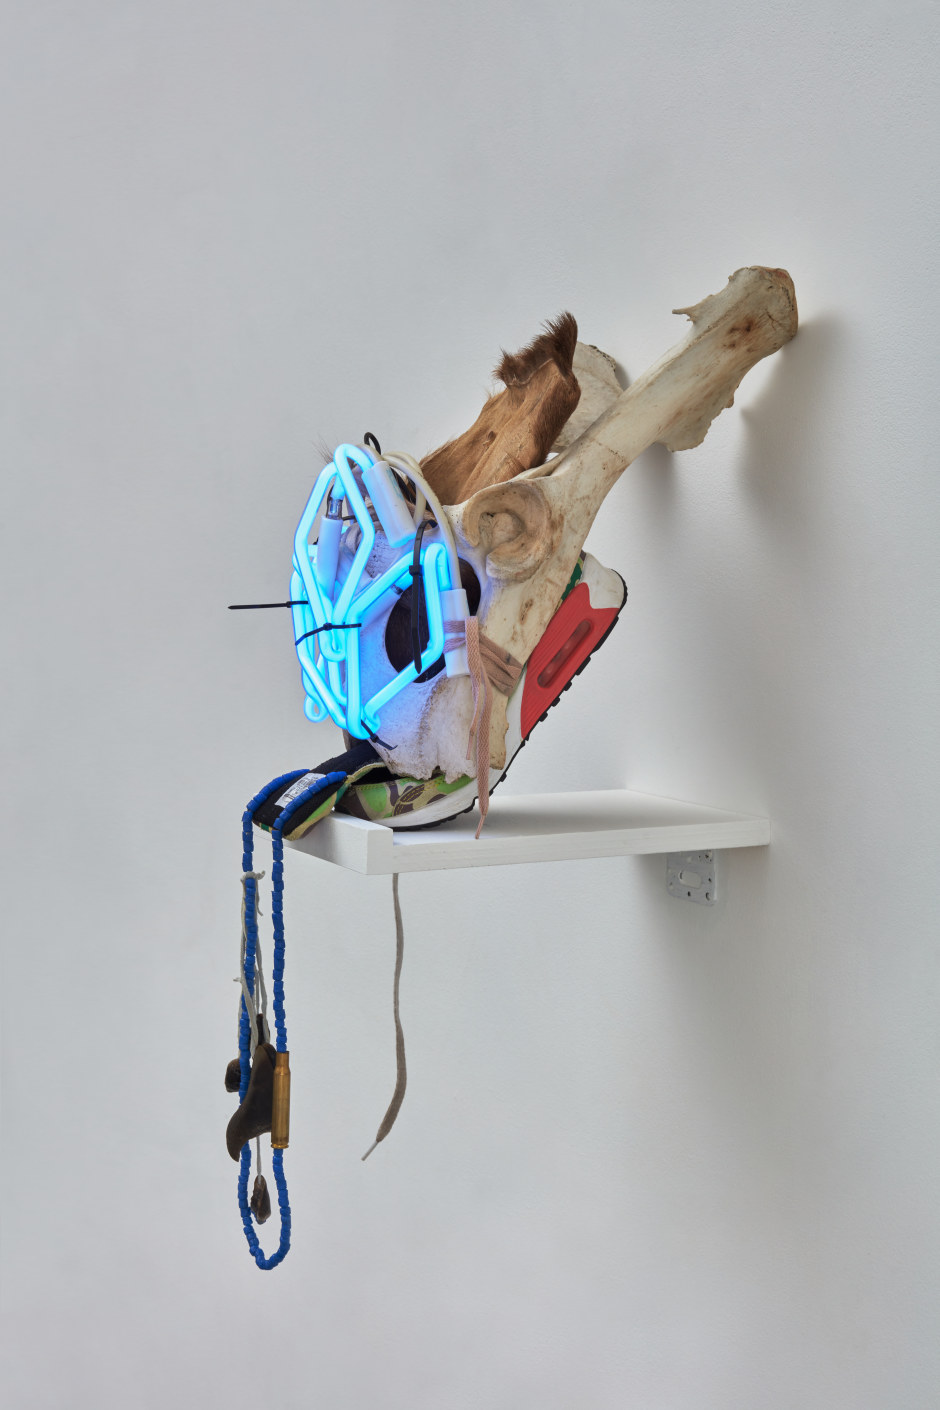 Natalie Ball  You usually bury the head in the woods Trophy Head, 2021  neon glass, extension cord, cow bone, shoe, deer hooves, beads, bullet case, elk hide  71 x 30.5 x 37 cm / 28 x 12 ⅛ x 14 ⅝ in